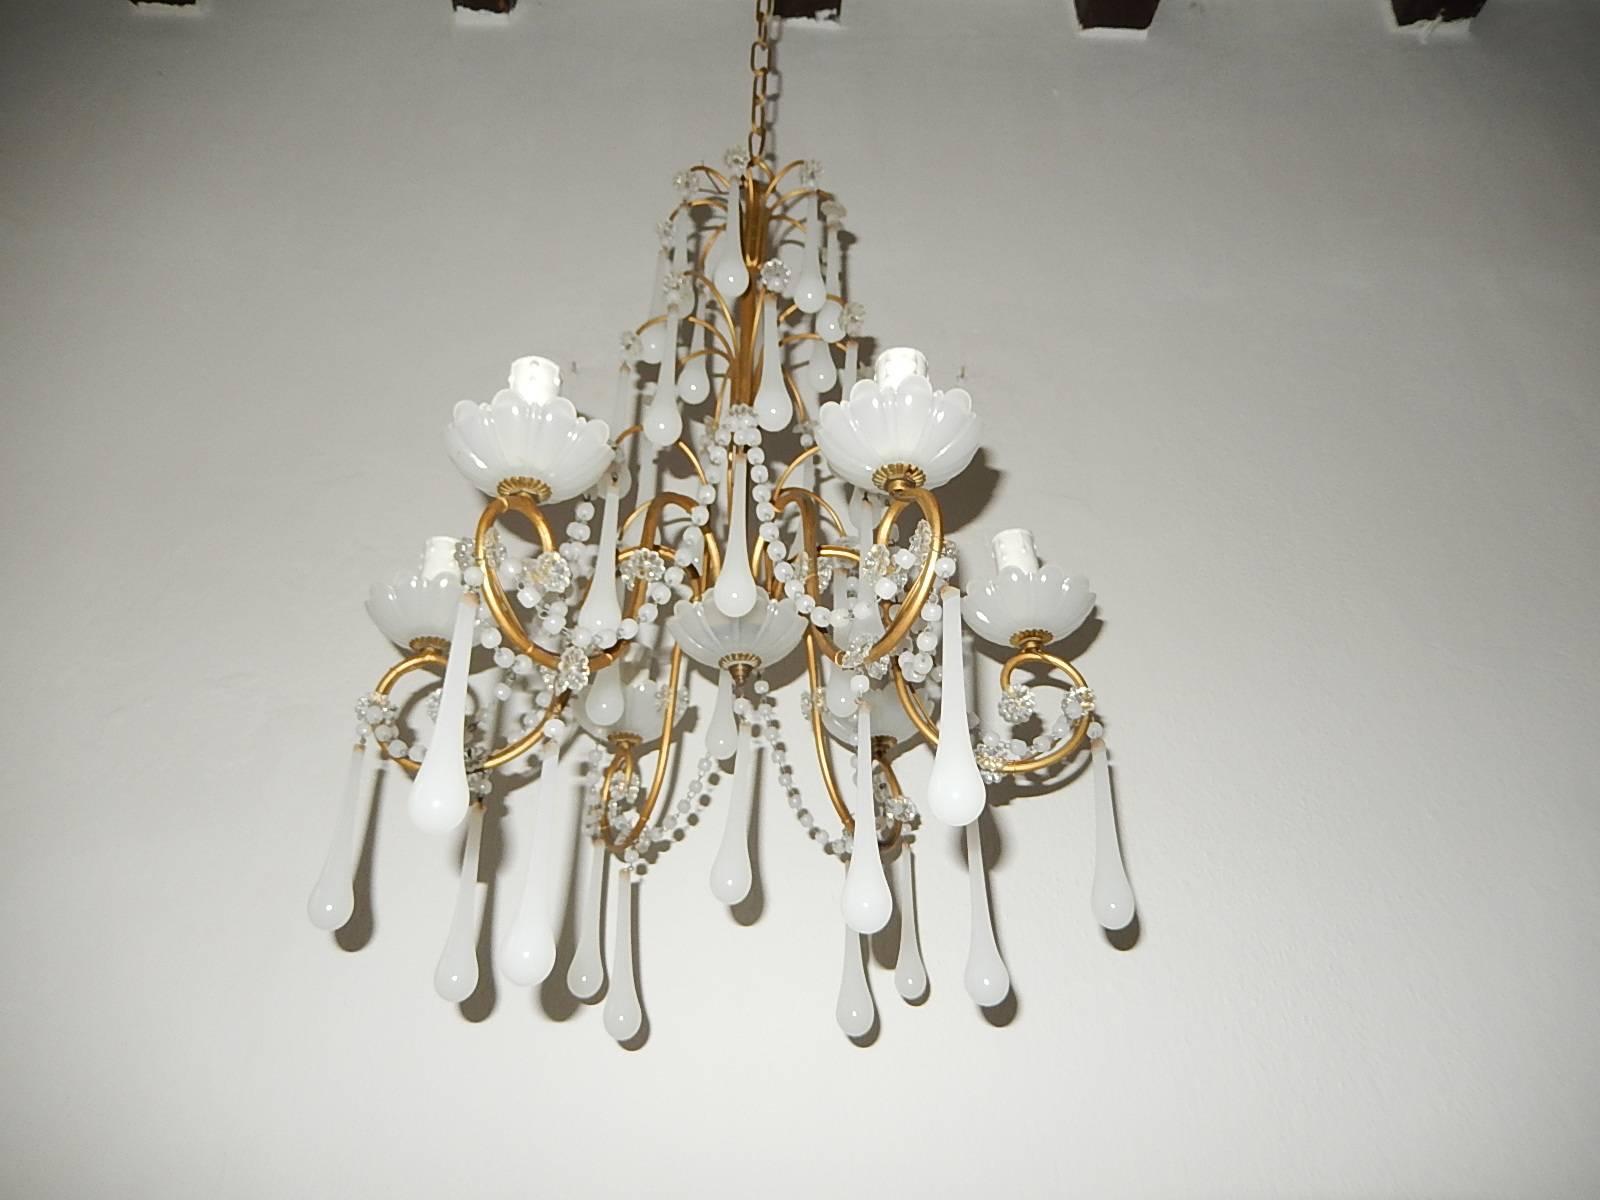 1930 French White Opaline Bobeches, Beads and Drops Chandelier 4